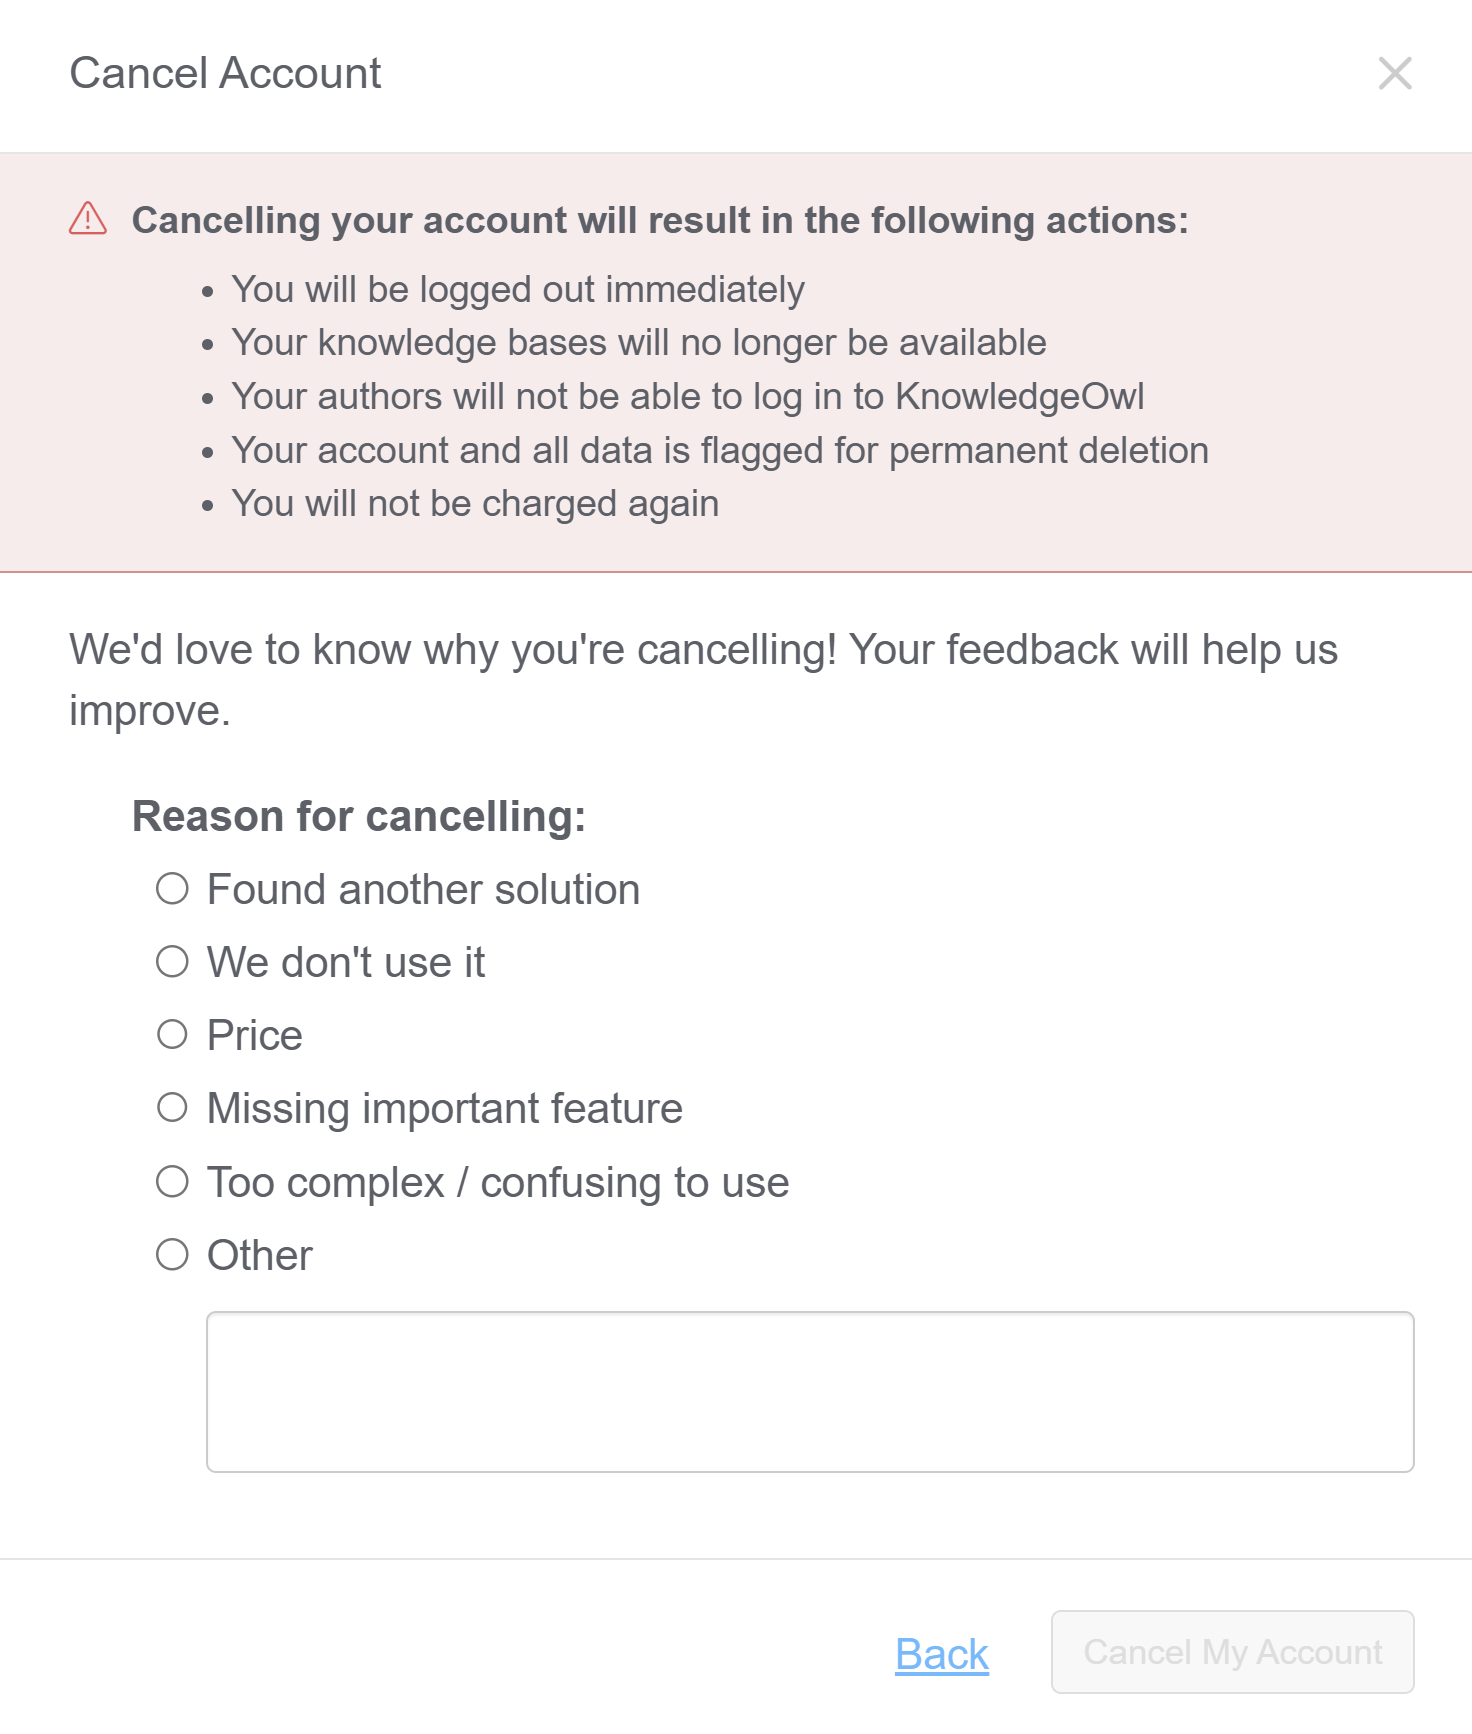 The Cancel Account pop-up. The pop-up has a warning at the top to explain what actions cancelling will kick off and a multiple choice list for you to select the reason you're cancelling.